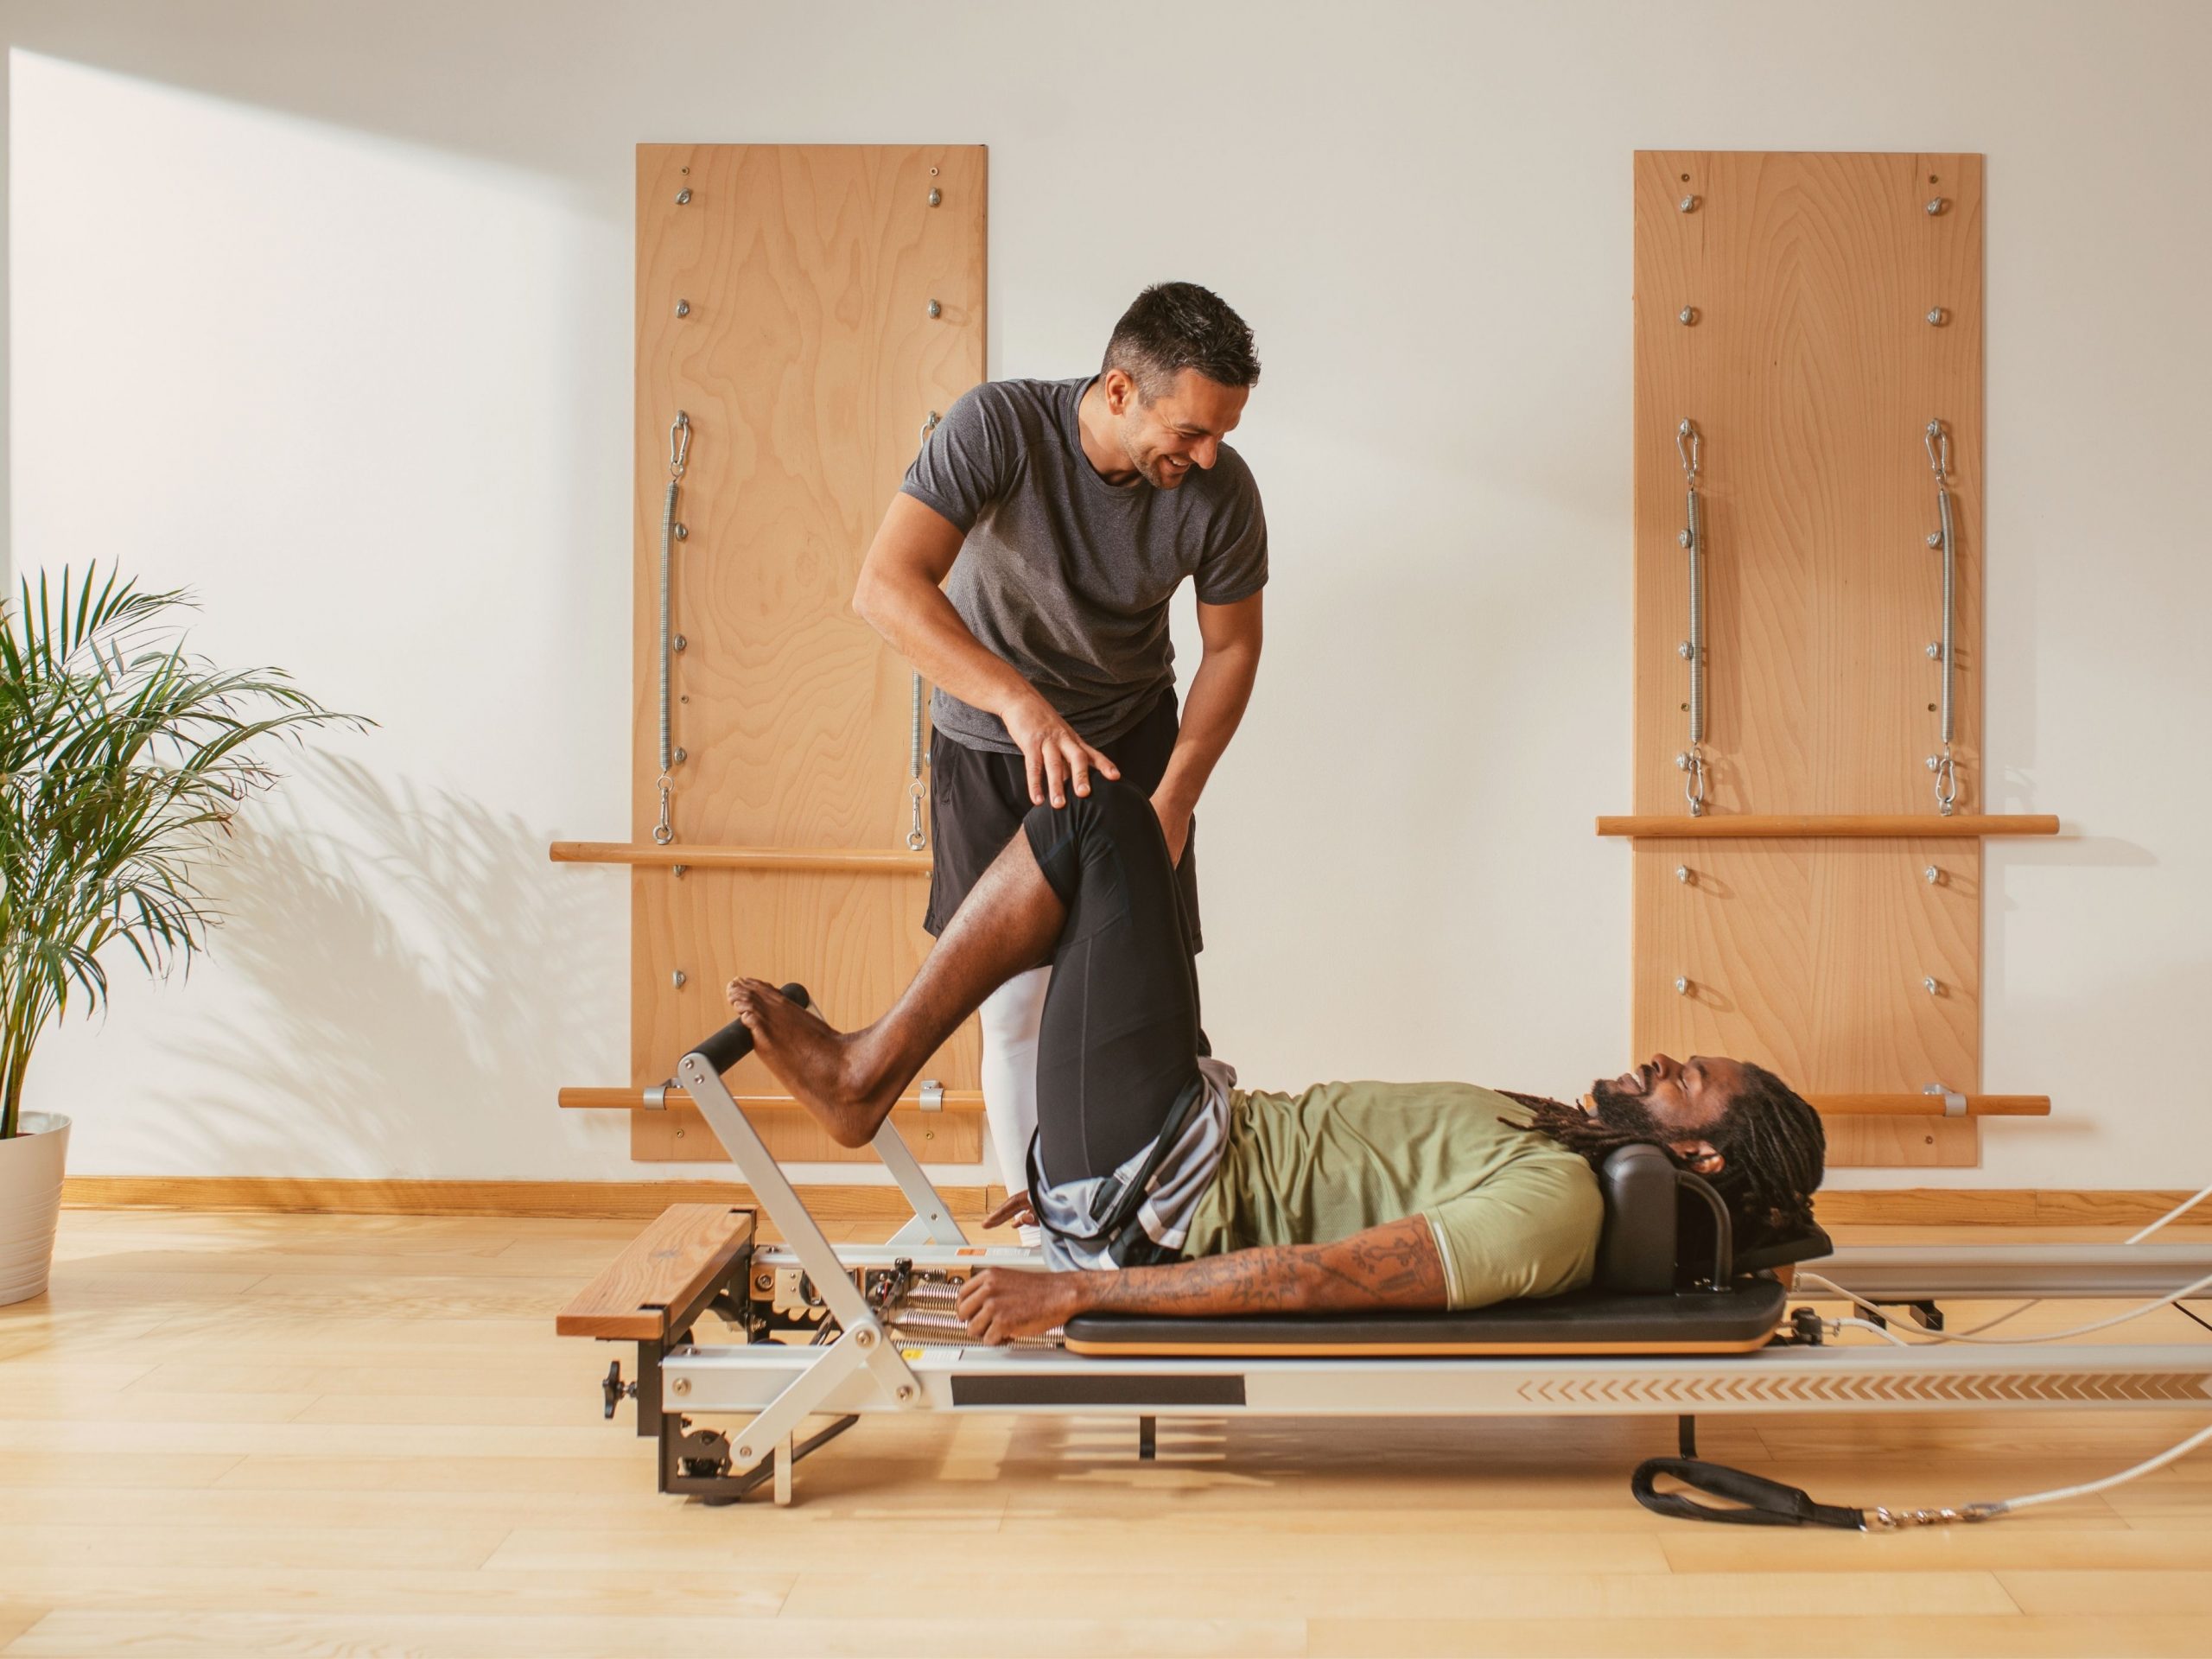 Reformer Pilates - An introduction to this excellent form of exercise